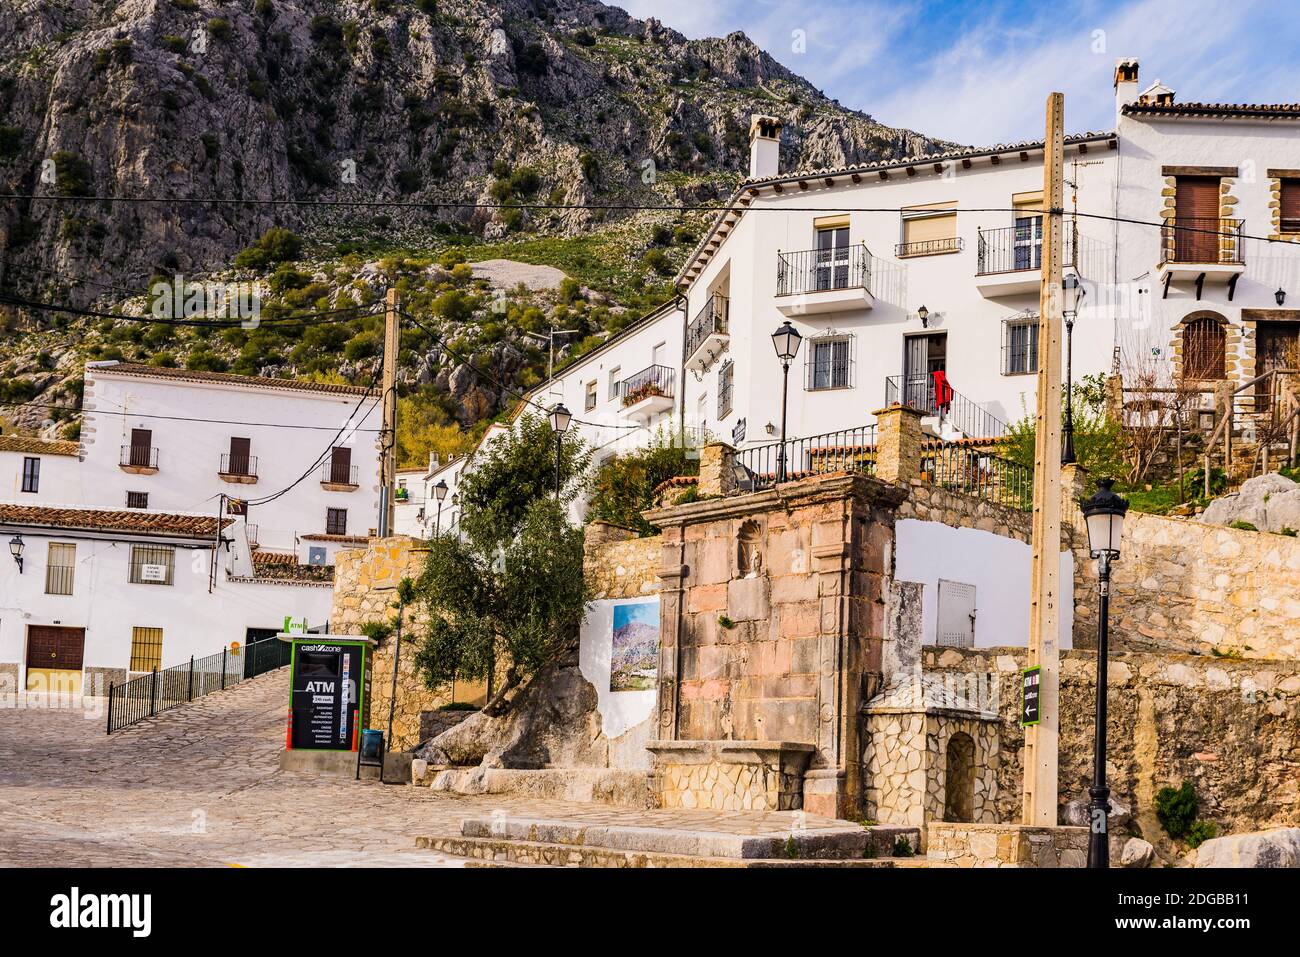 Villaluenga del Rosario located at an altitude of 858 meters, being the highest and, in turn, the smallest town in the province of Cádiz. Villaluenga Stock Photo